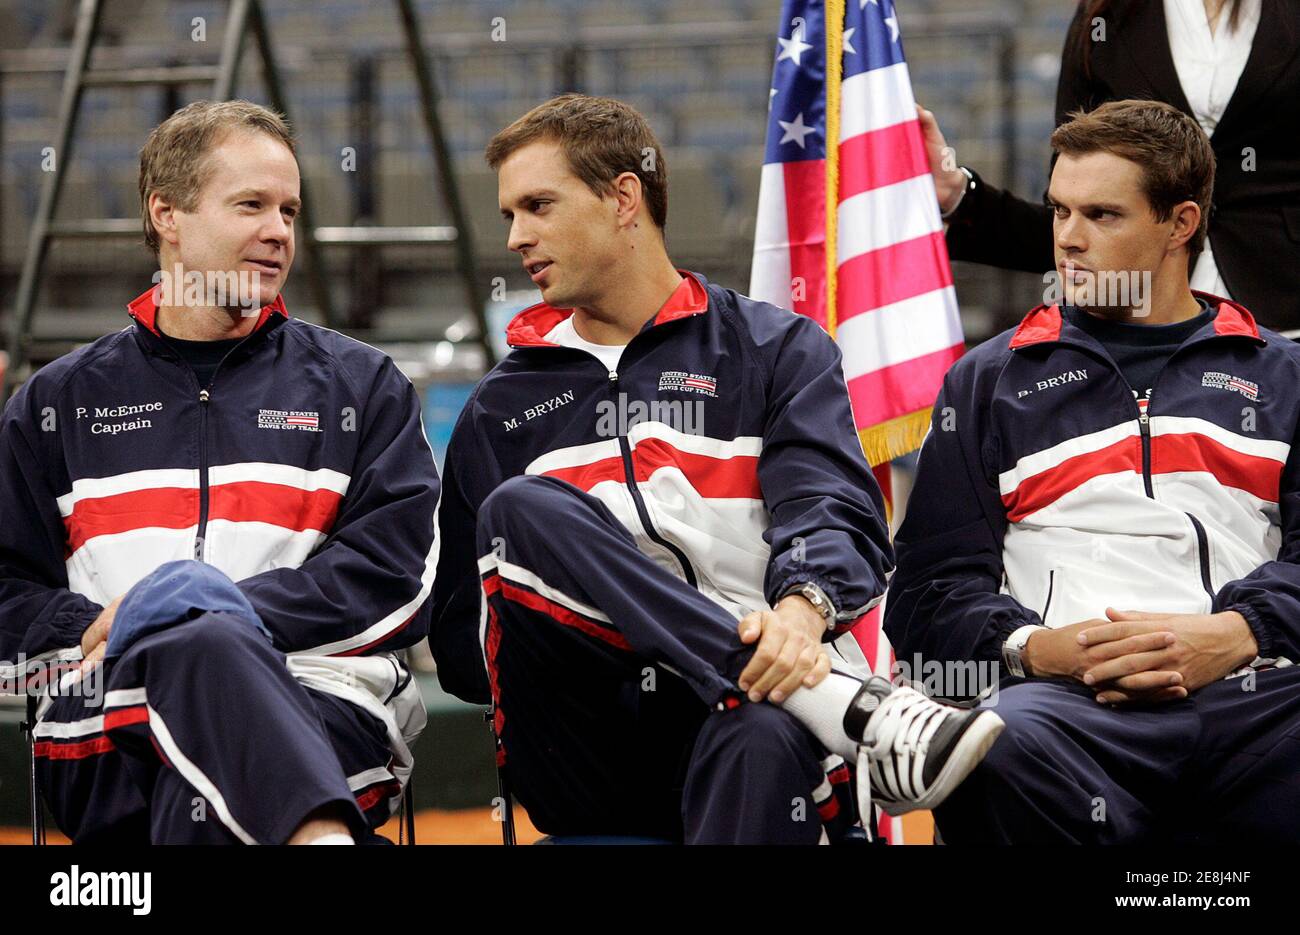 US Davis Cup team members (L-R), team captain Patrick McEnroe, Mike Bryan and Bob Bryan attend the draw for their Davis Cup tie in Belgrade March 4, 2010. Serbia will play against the US in the Davis Cup first round, starting on March 5 in Belgrade.  REUTERS/Ivan Milutinovic  (SERBIA - Tags: SPORT TENNIS) Stock Photo